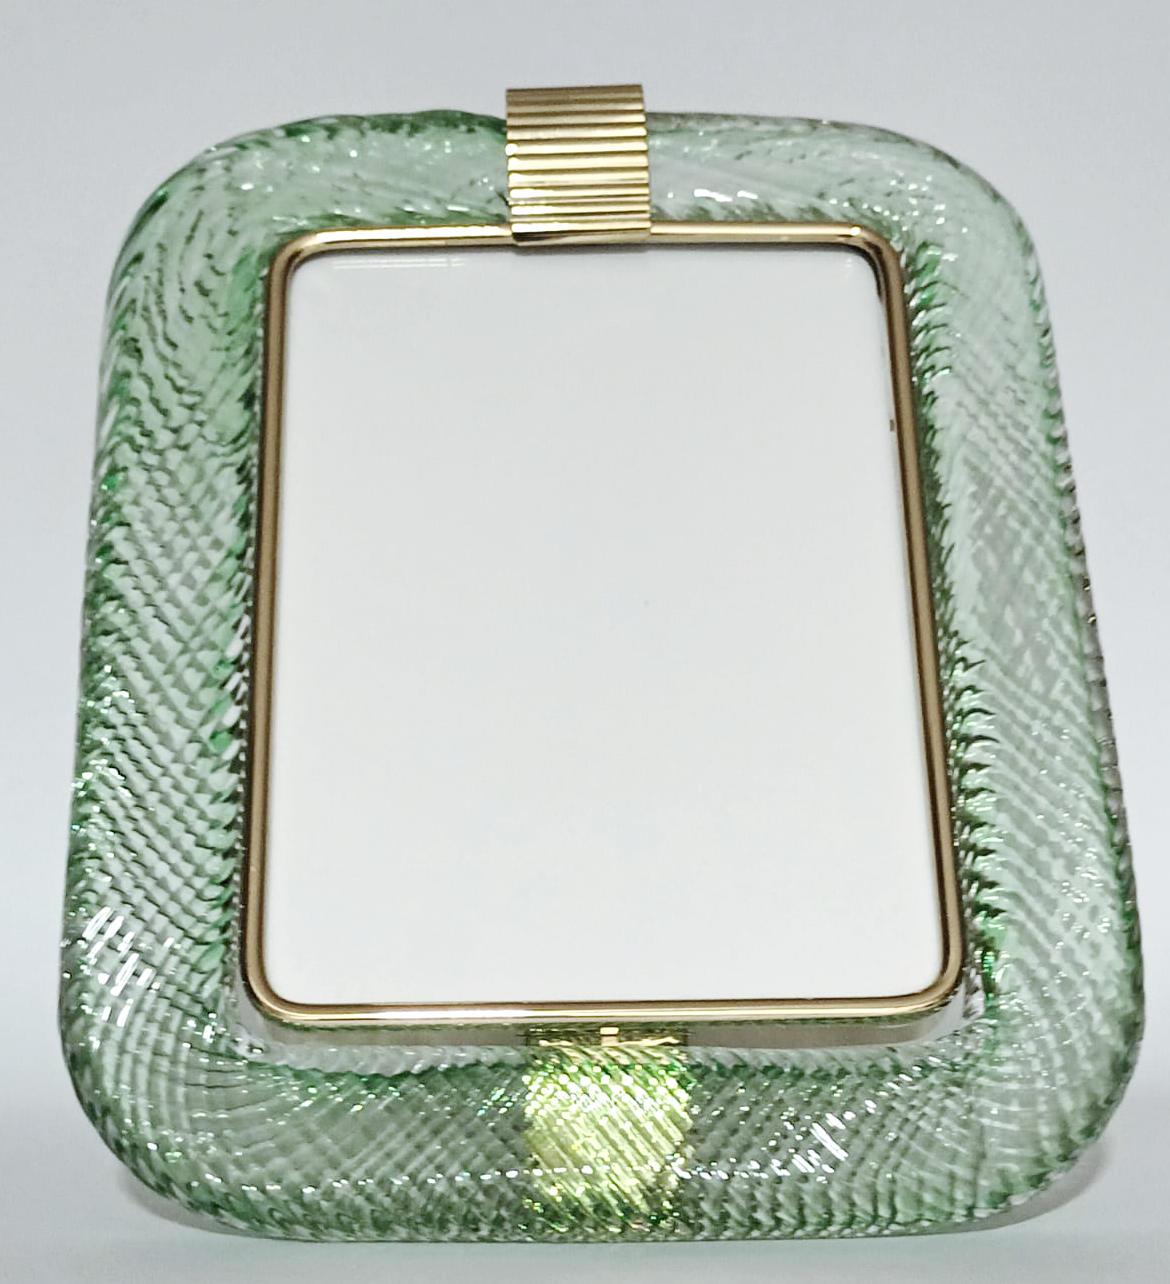 Mid-Century Modern Murano Green Photo Frame by Barovier e Toso - 3 Available For Sale